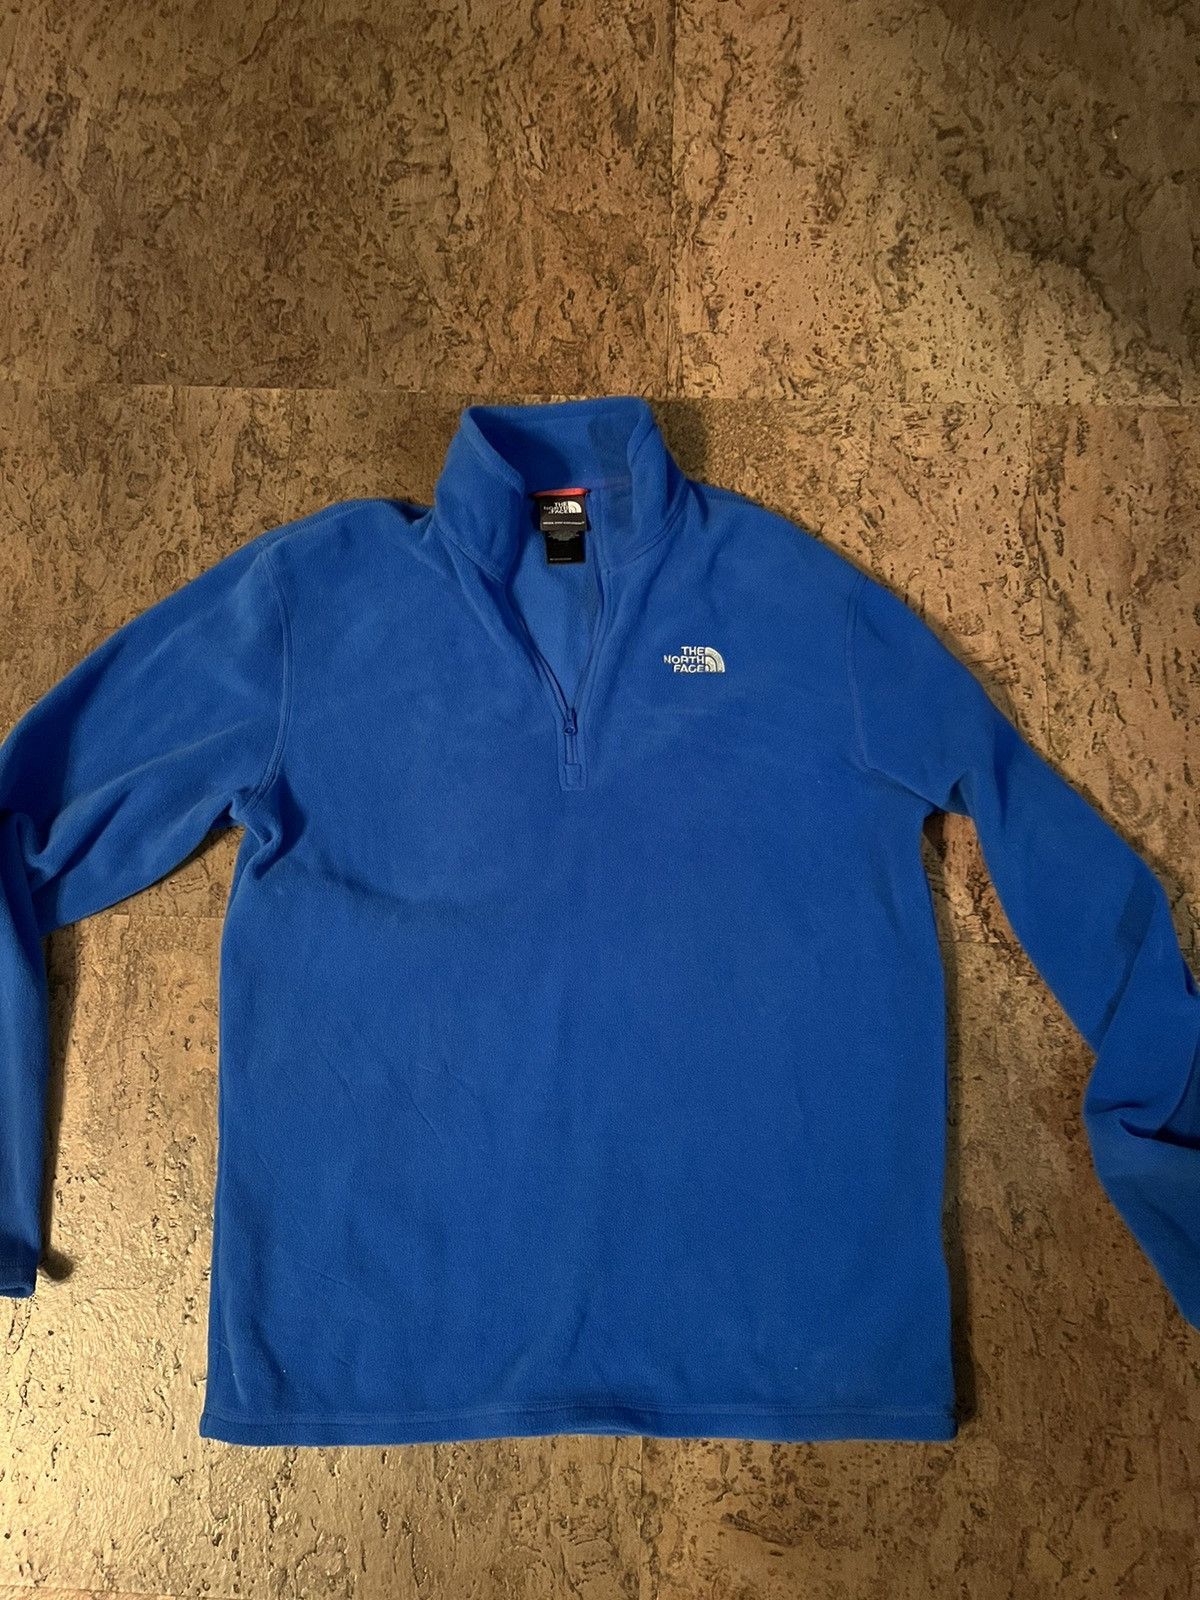 The North Face North face 2010’s Blue/white light fleece Size US M / EU 48-50 / 2 - 1 Preview